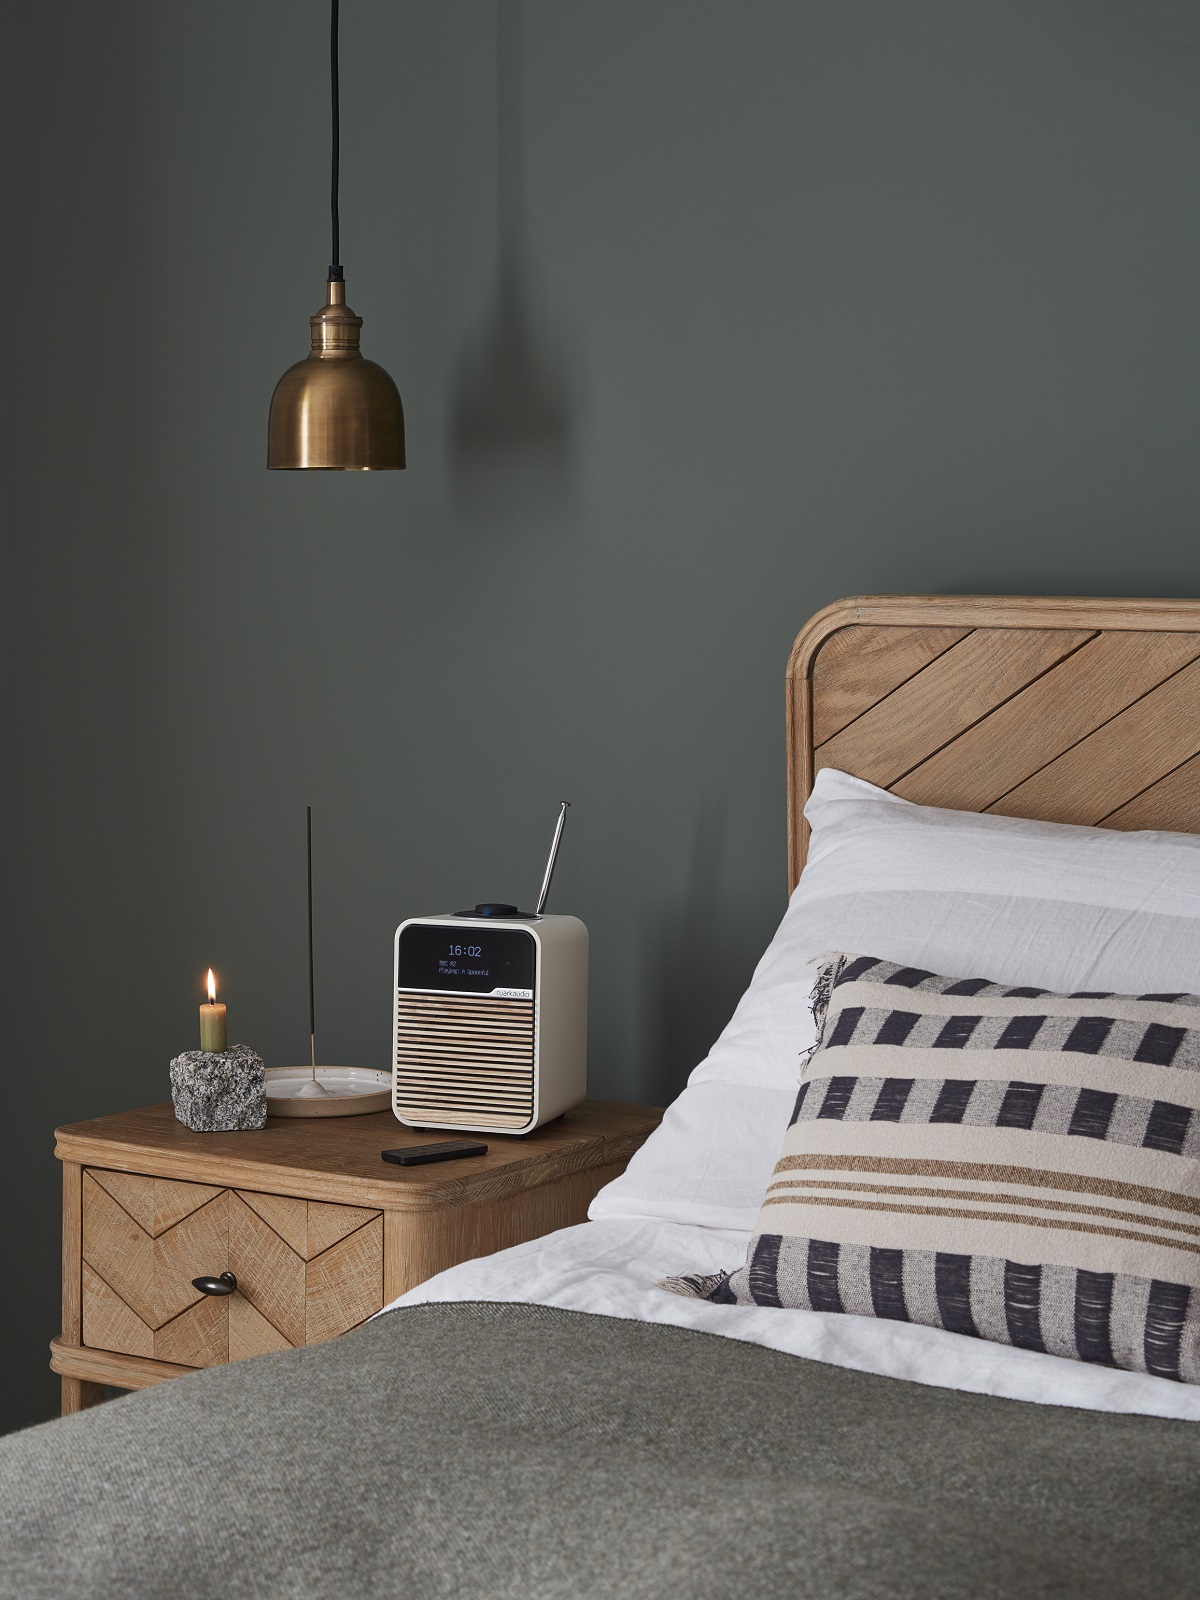 wooden bed with patterned cushion and grey throw with Ruark radio on table